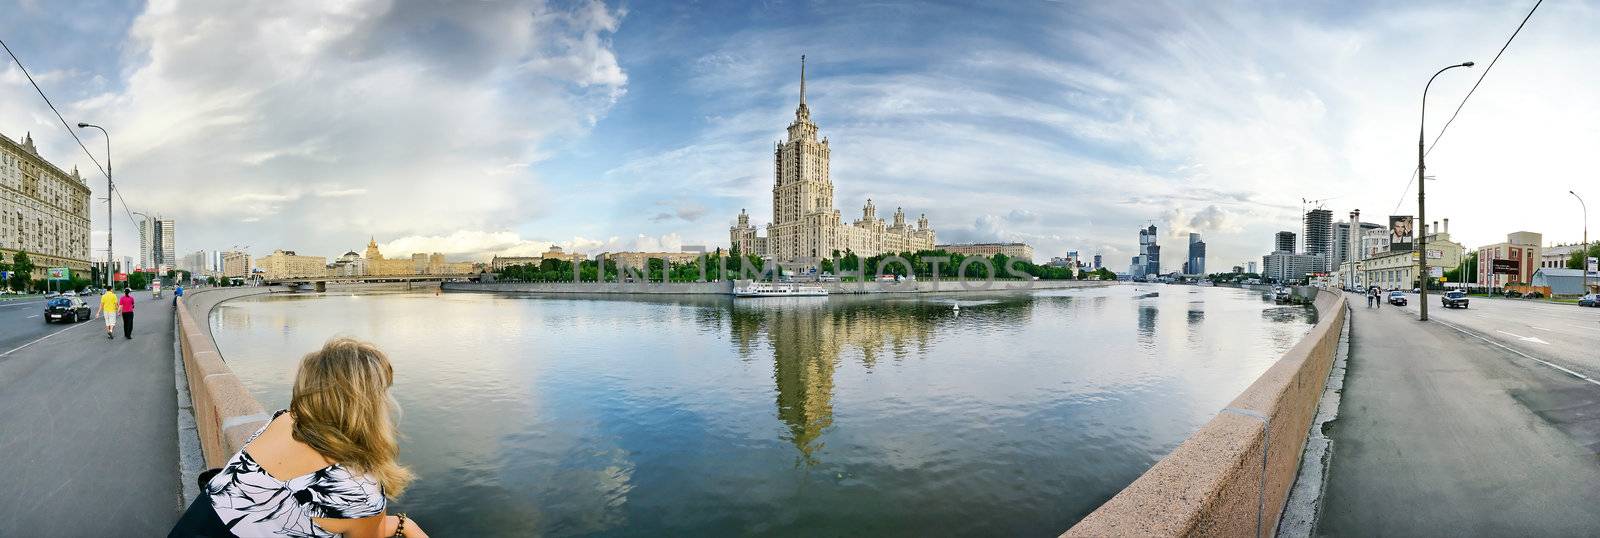 panoramic photo of Moscow-city on a bank of a river